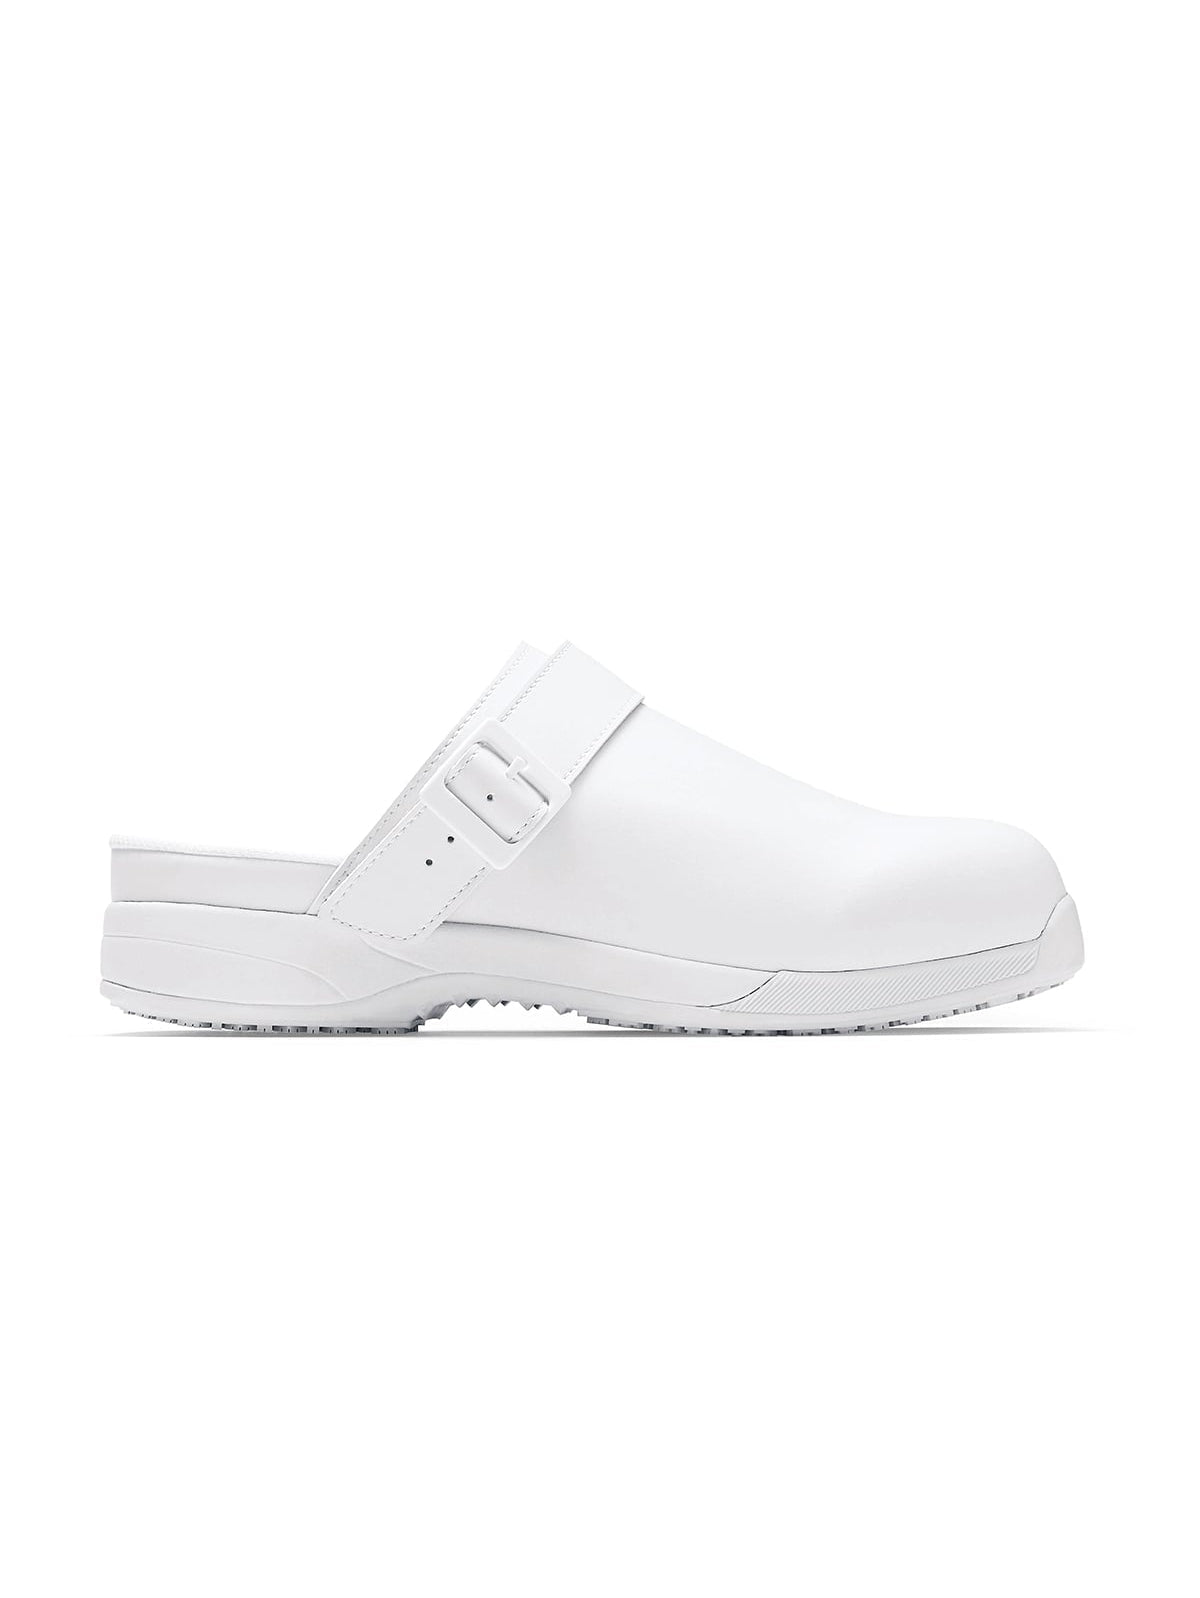 Unisex Work Shoe Triston II SB White by  Shoes For Crews.